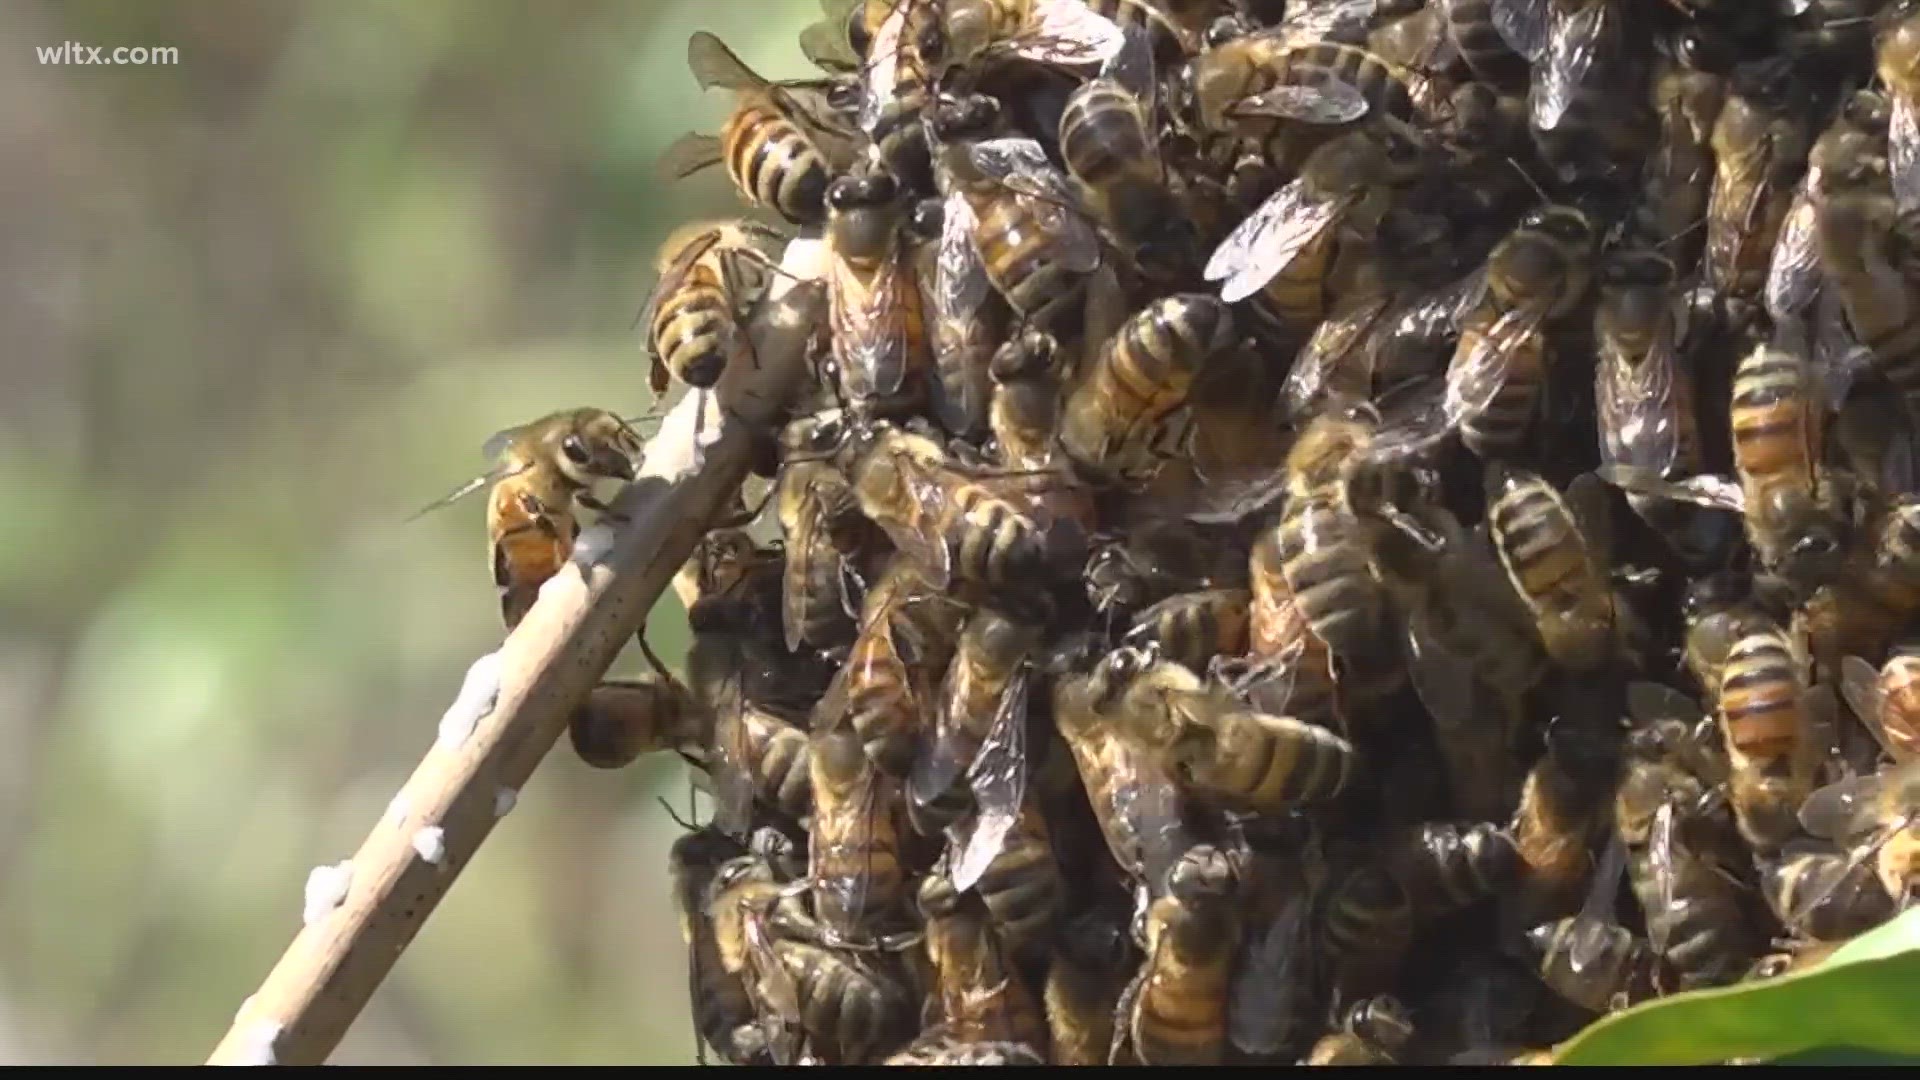 Swarm season means honey bees are buzzing about.